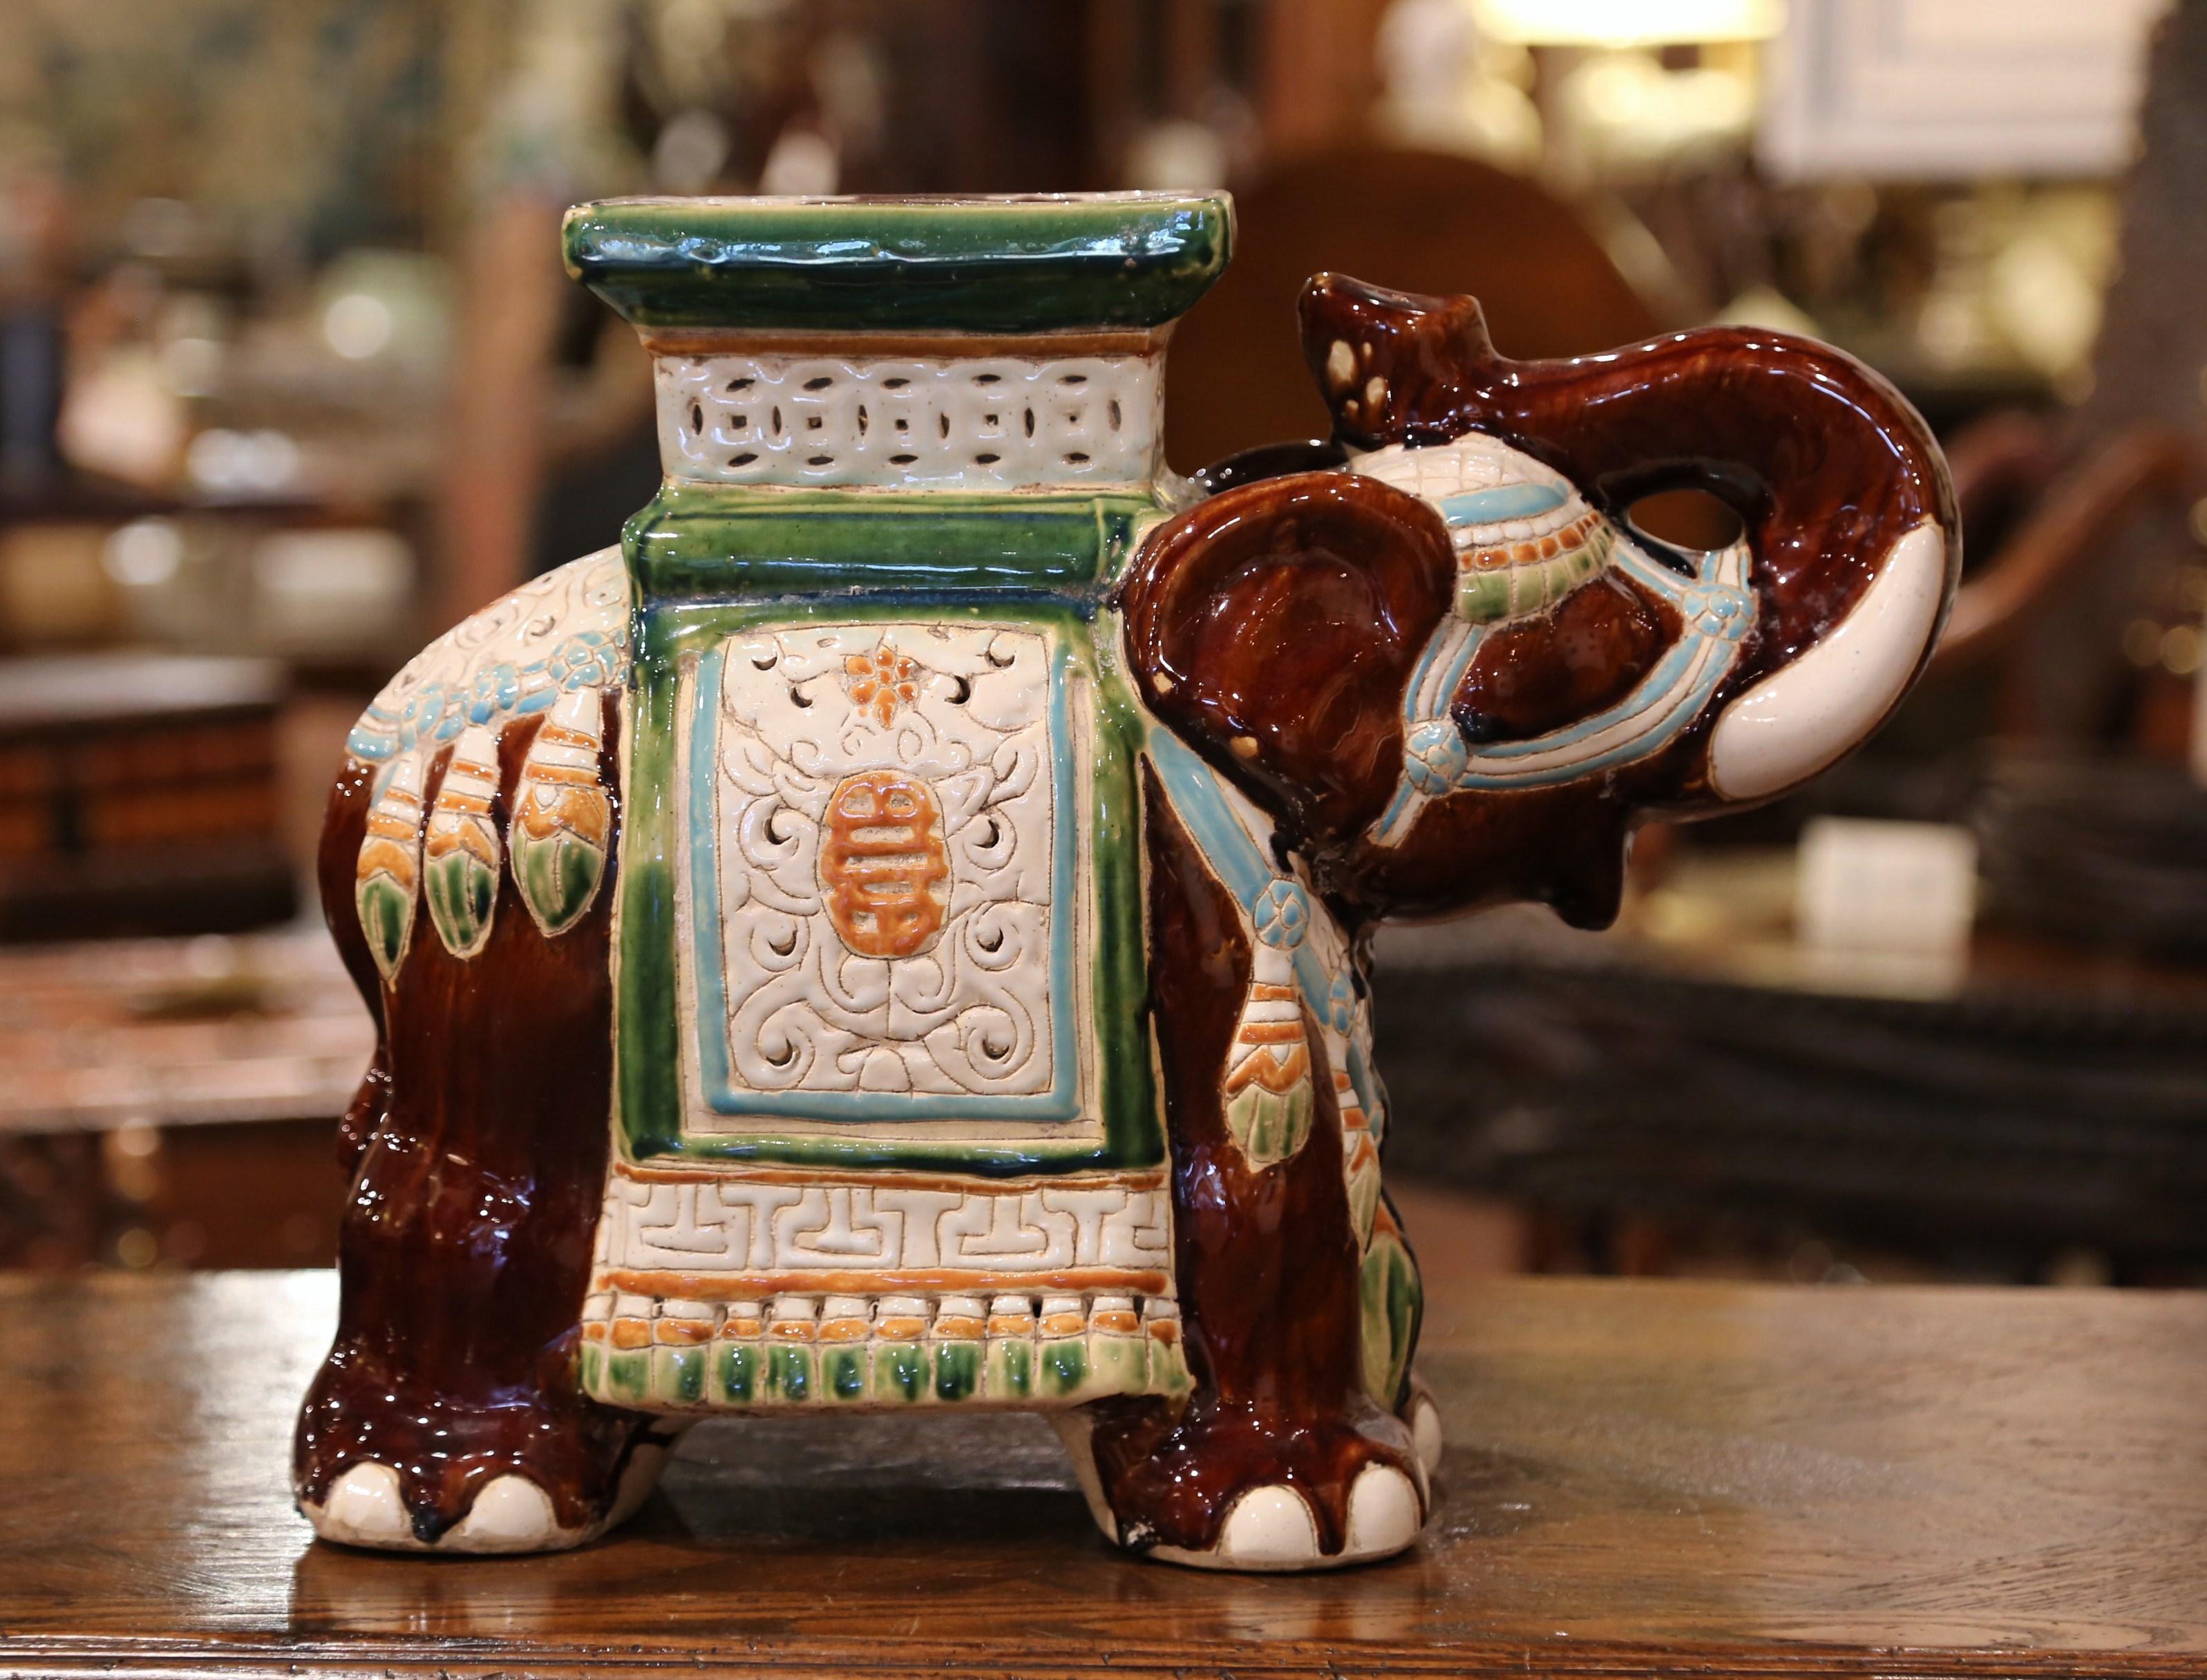 This interesting, vintage porcelain garden seat was found in France. Crafted circa 1960, the ceramic seating shaped as an elephant with his trunk raised (good luck sign in Asia), is heavily decorated in oriental finery; the colorful mammal has a